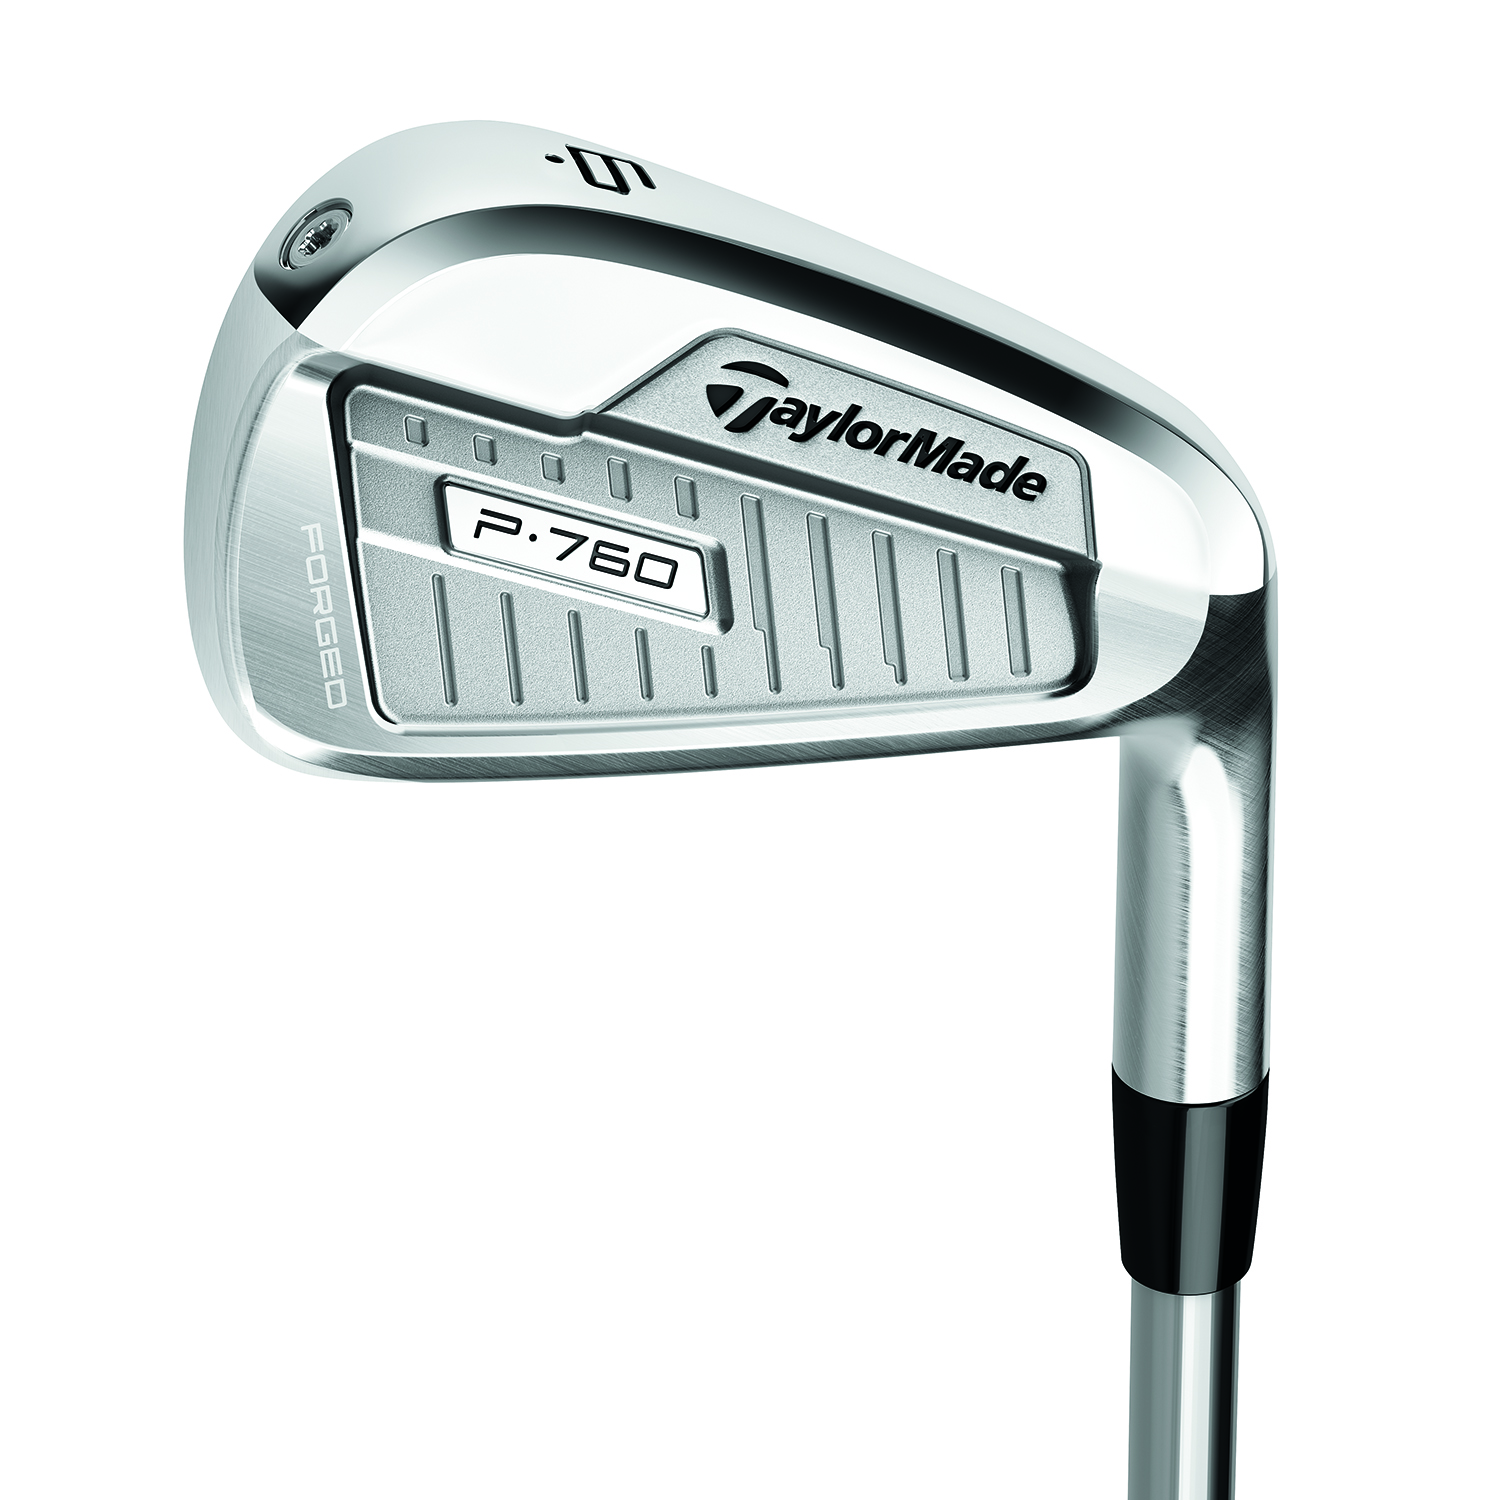 taylormade approach wedge